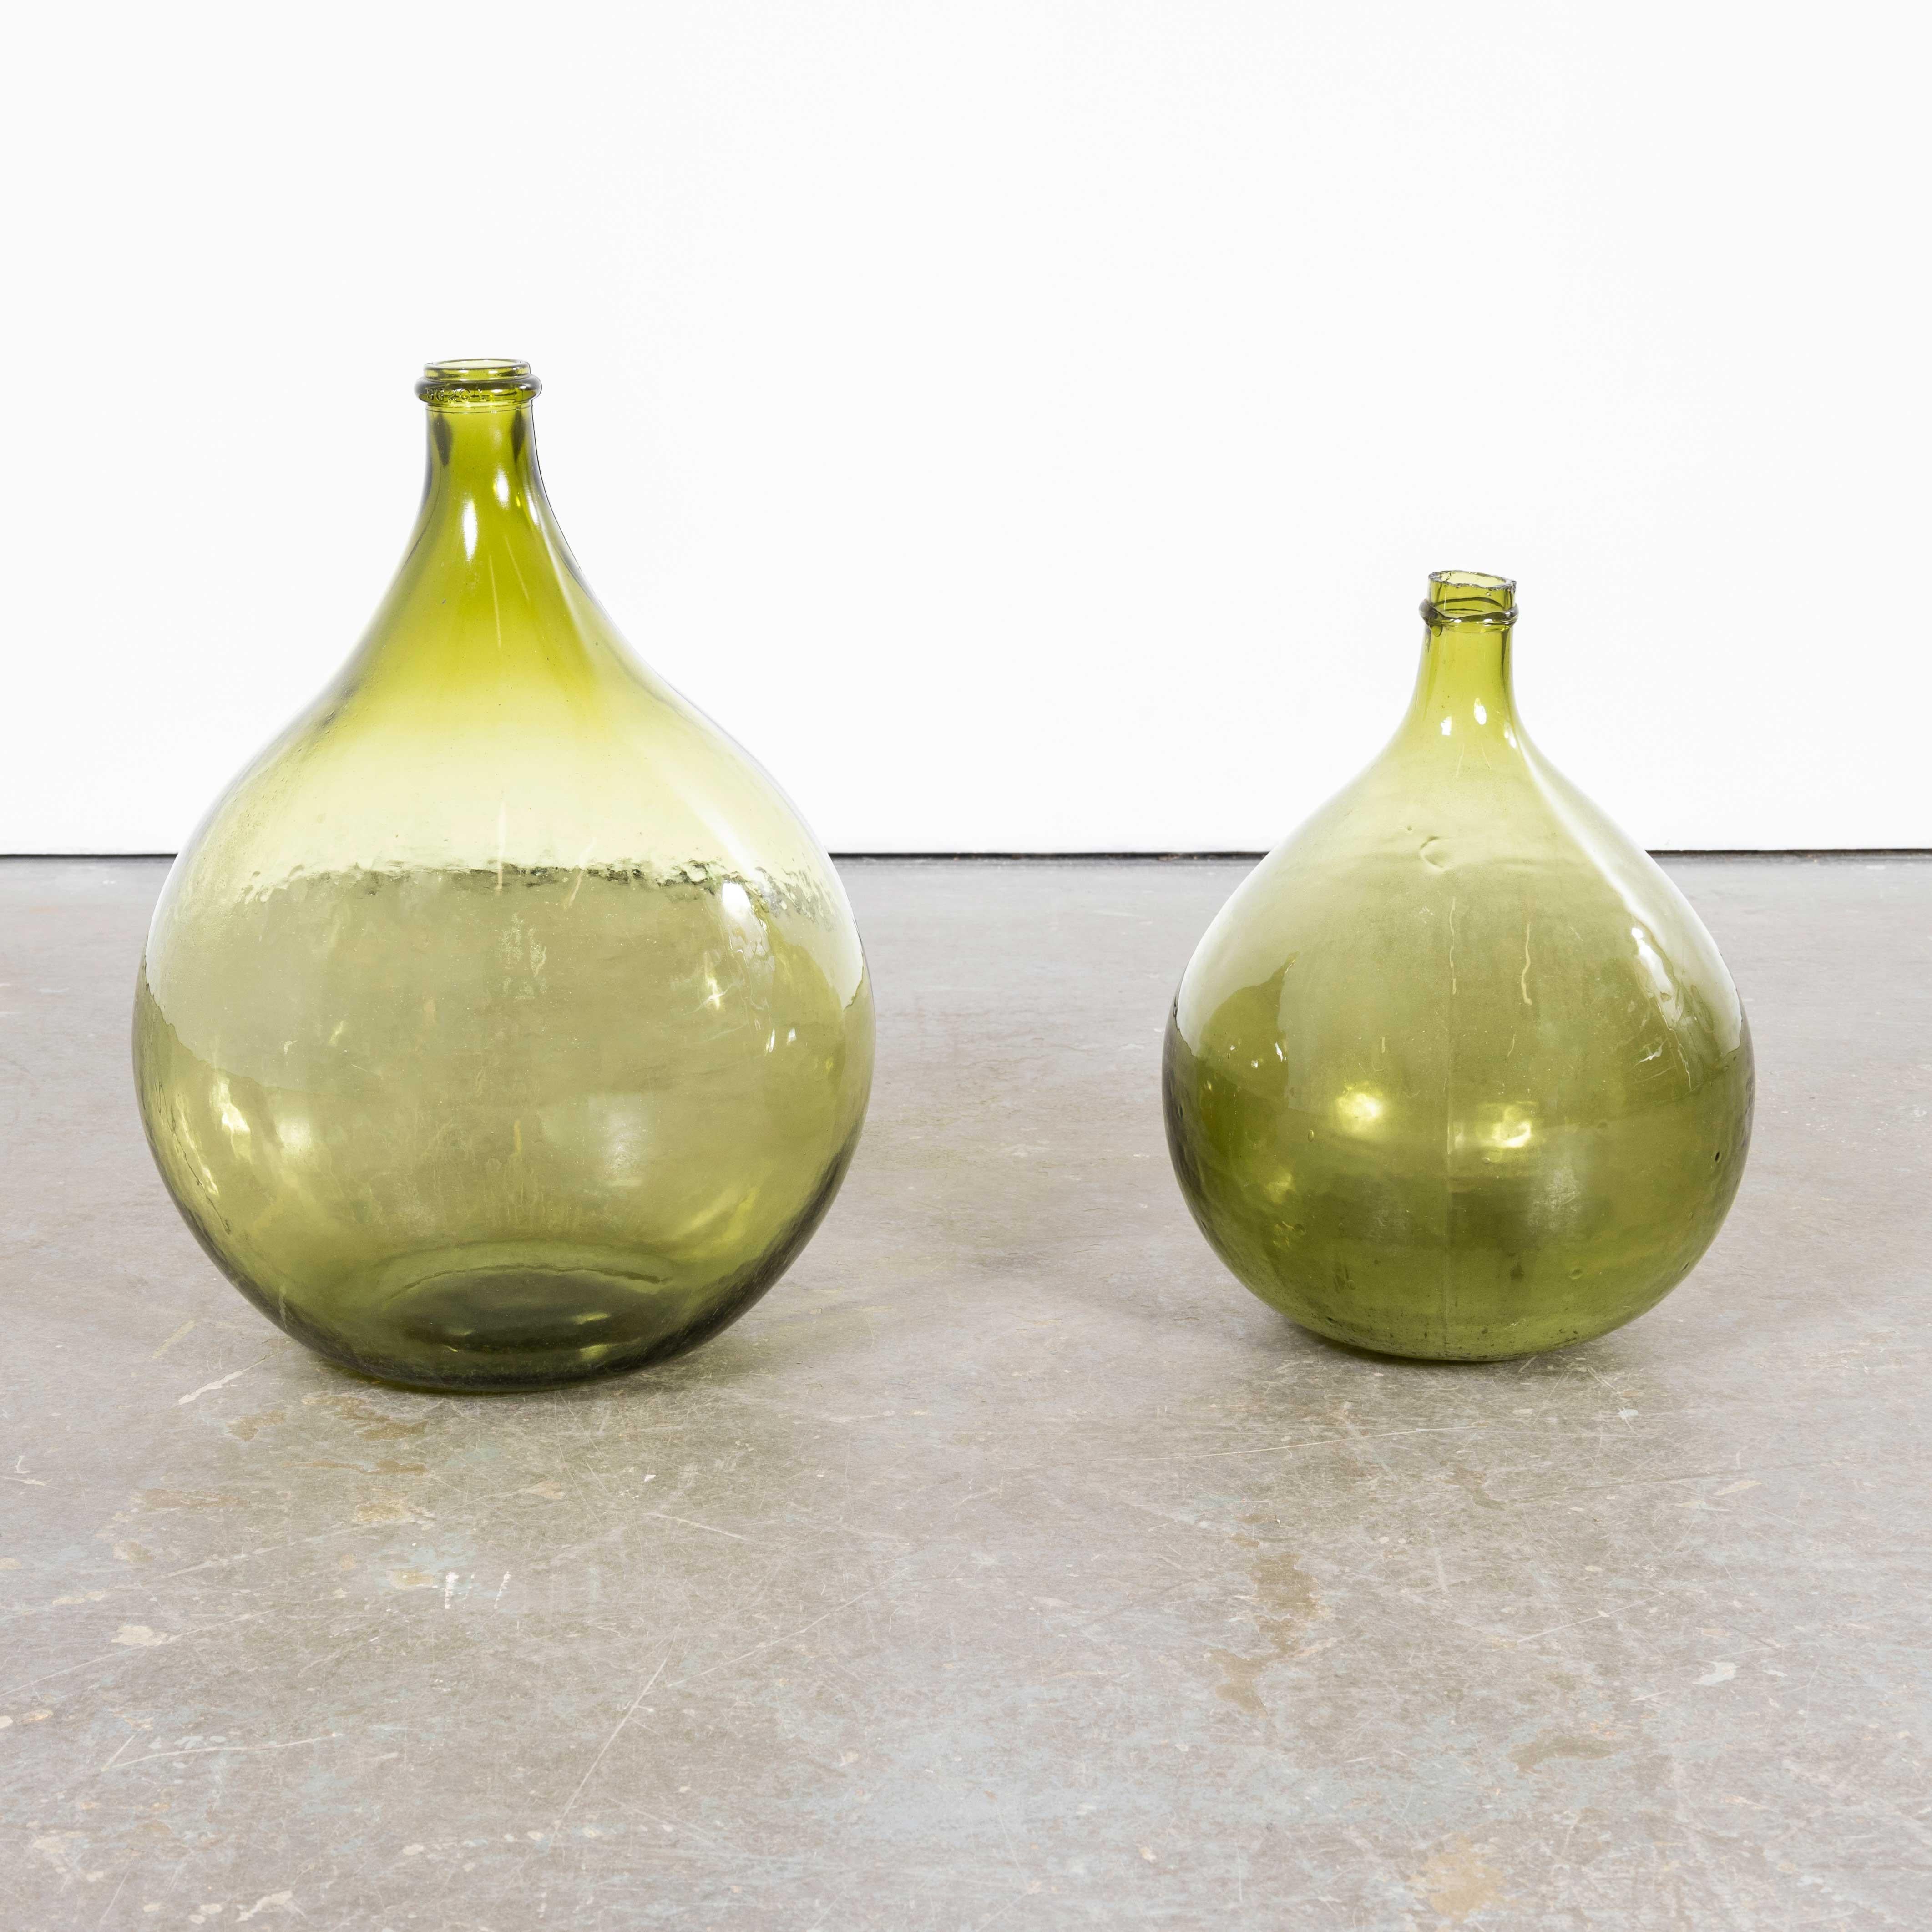 Vintage French Glass Demijohns – Pair (957.19)
Vintage French Glass Demijohns – Pair. A pair of mouth blown glass demijohns used as a traditional containers mainly for wine storage and transport. These demijohns have been carefully cleaned.